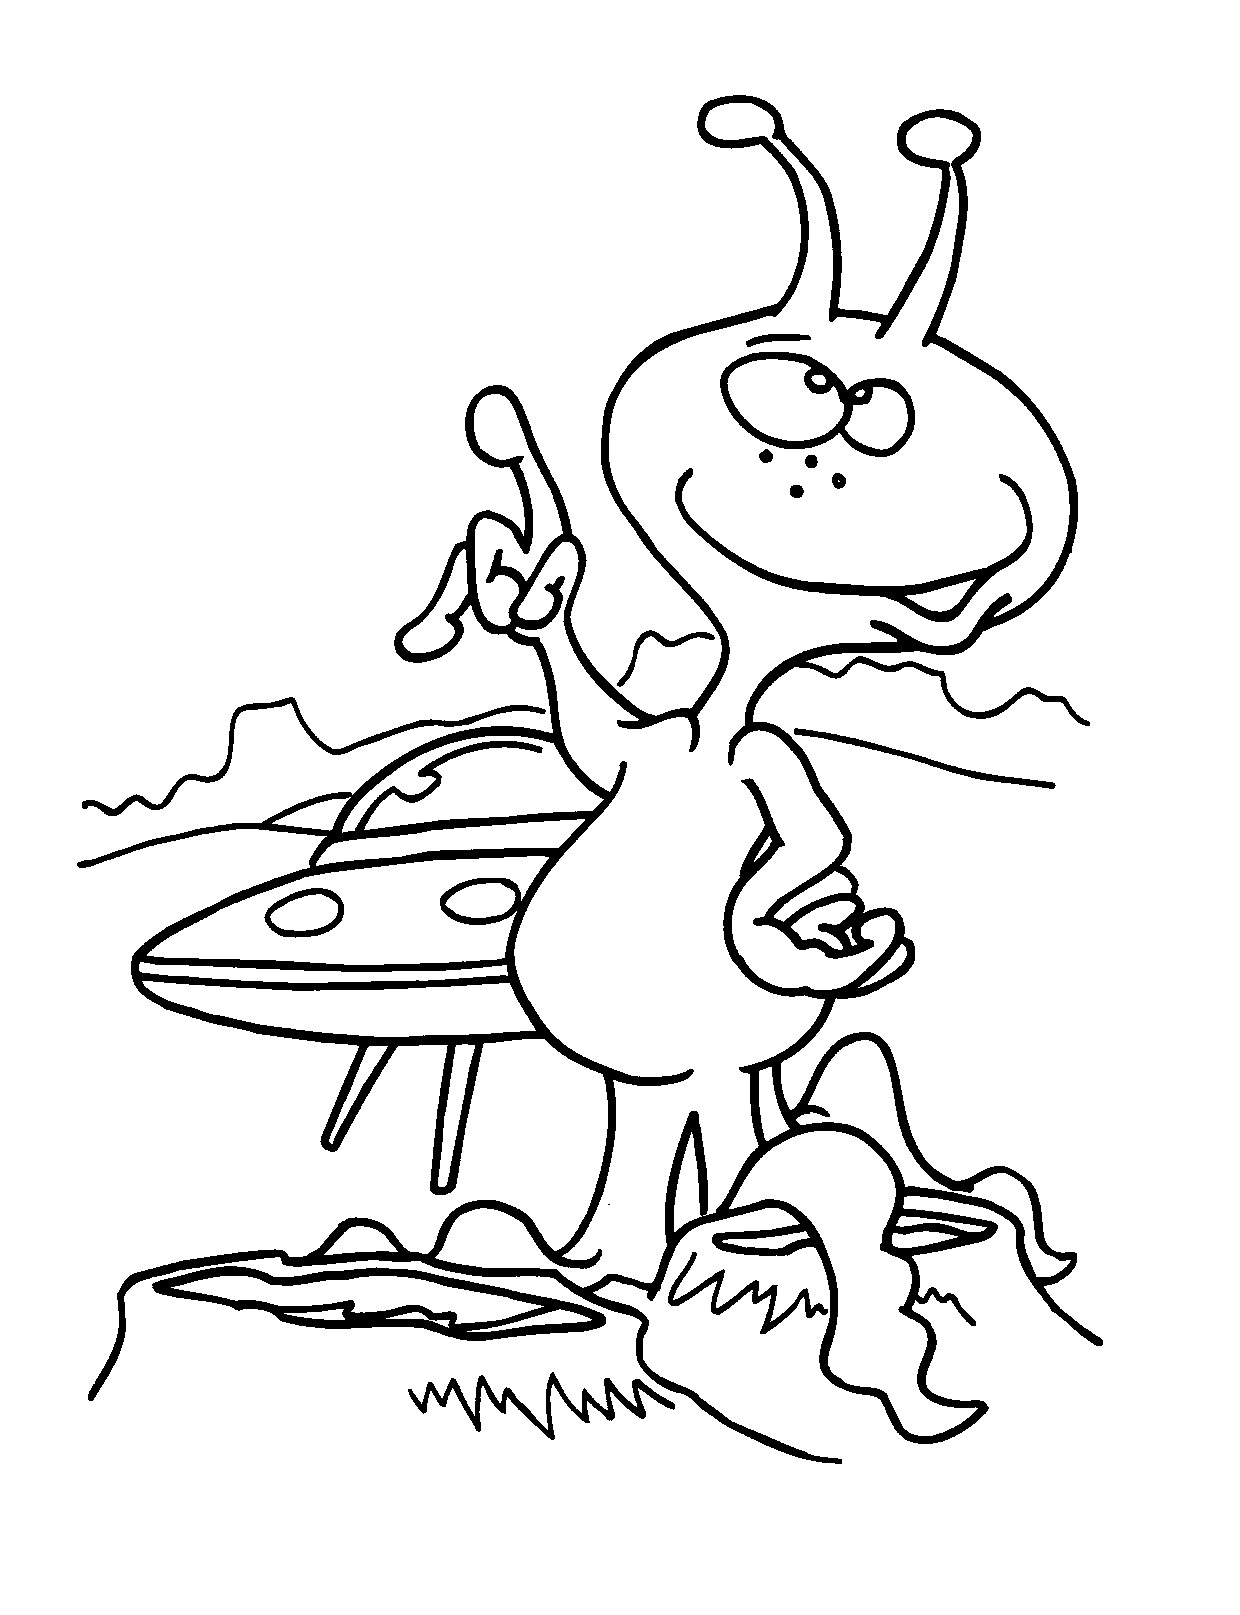 Download Free Printable Alien Coloring Pages For Kids